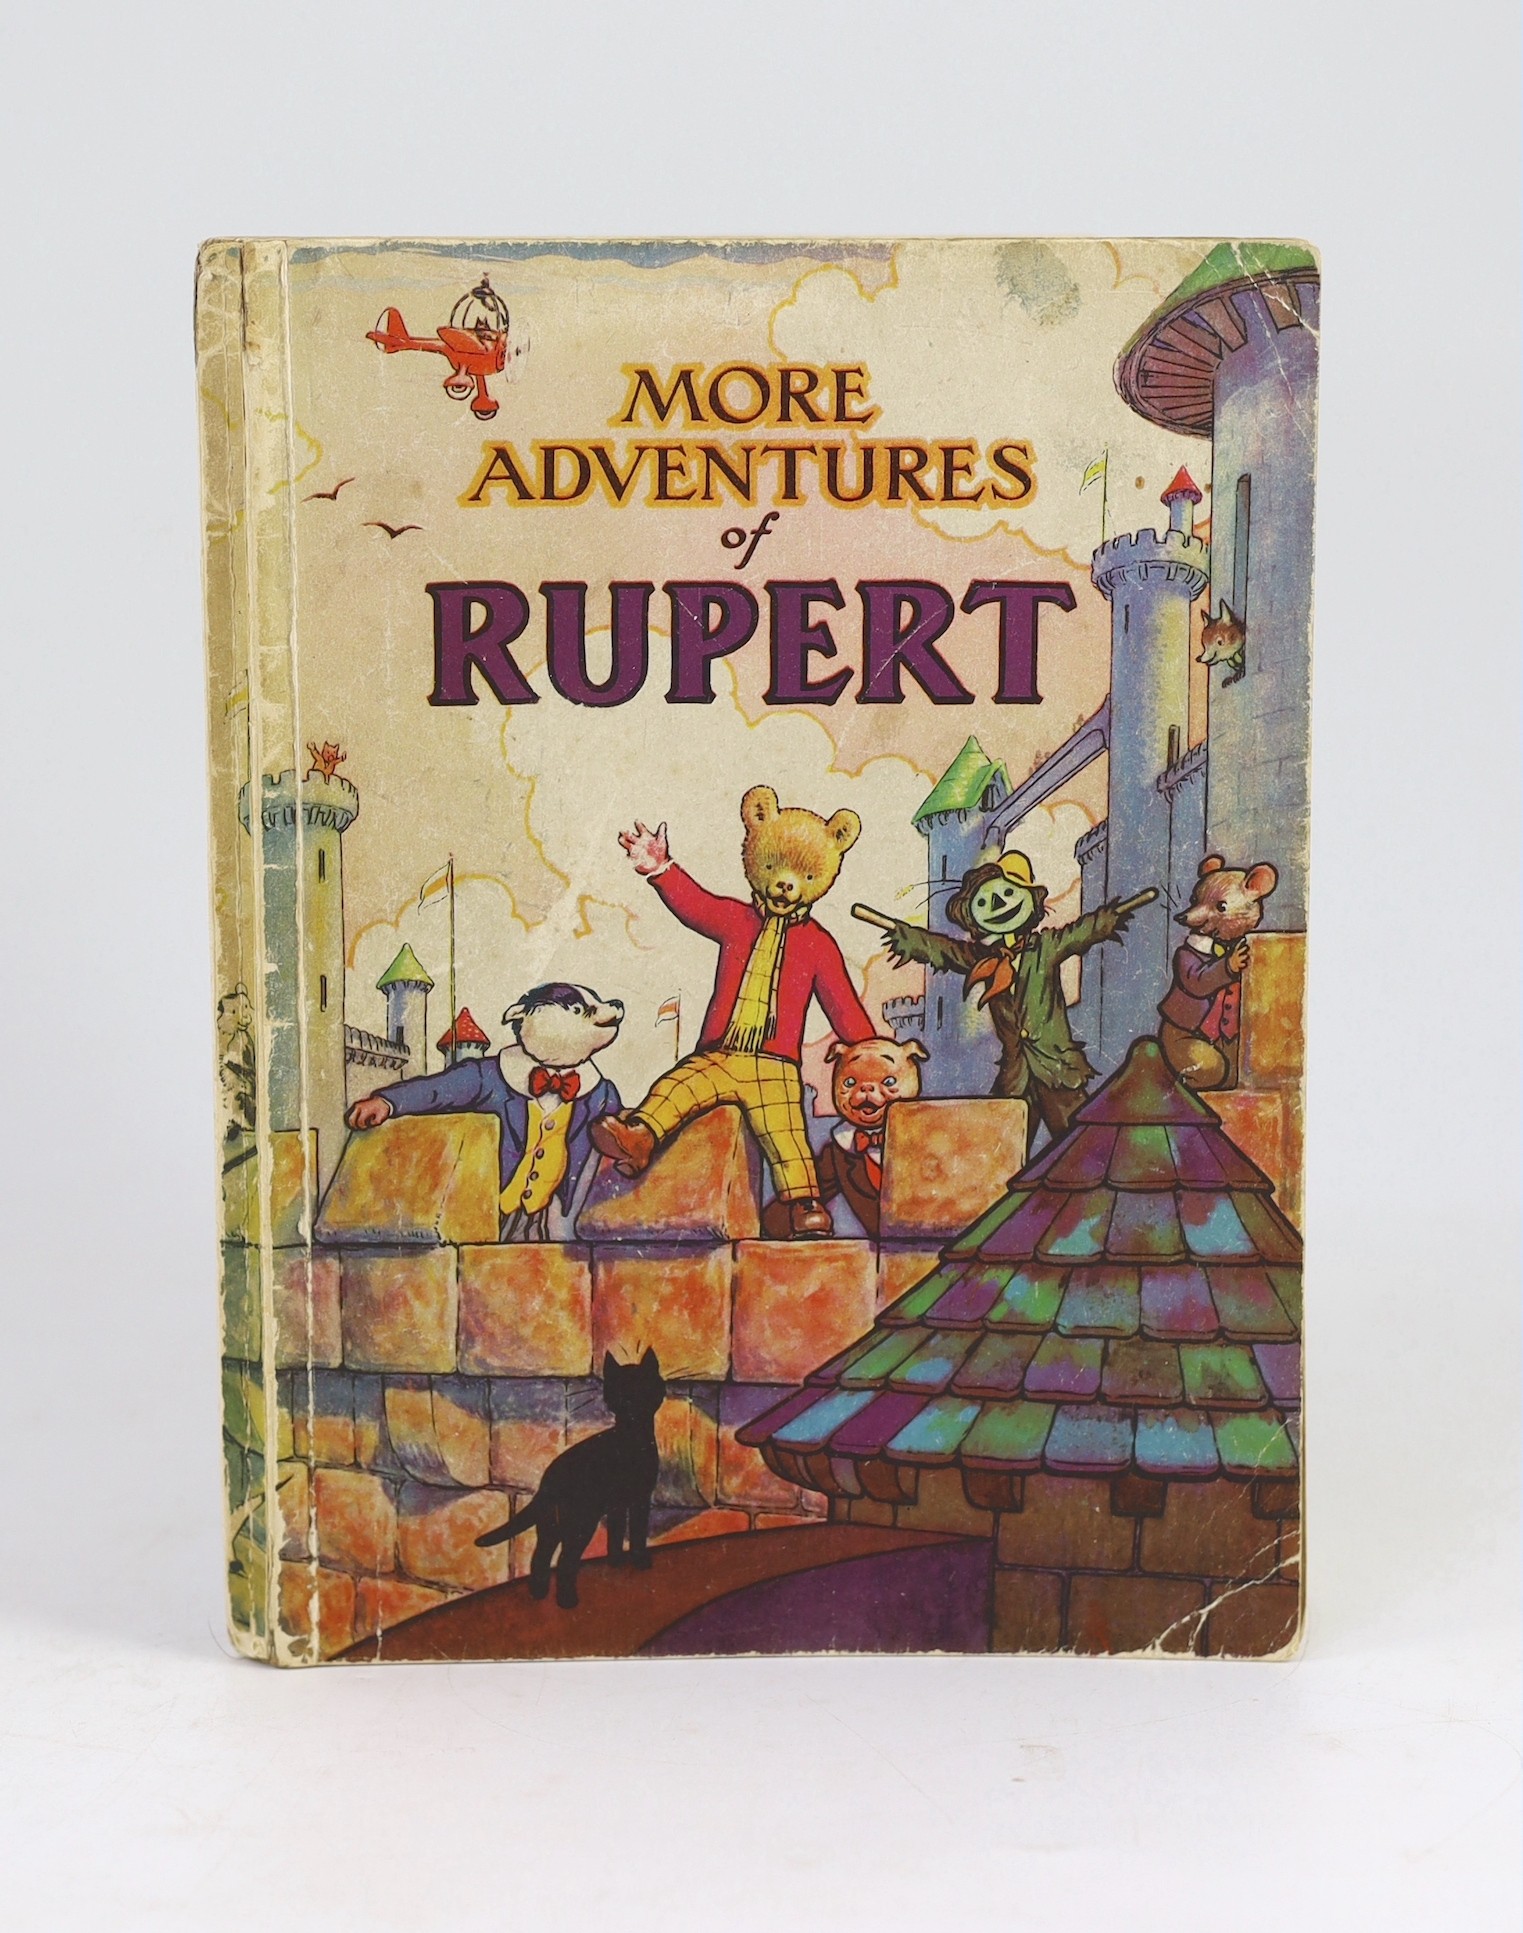 Bestall, Alfred E. - Rupert Annual - More Adventures of Rupert, price clipped, pencil owners inscription and pink crayon lettering, Daily Express, 1942